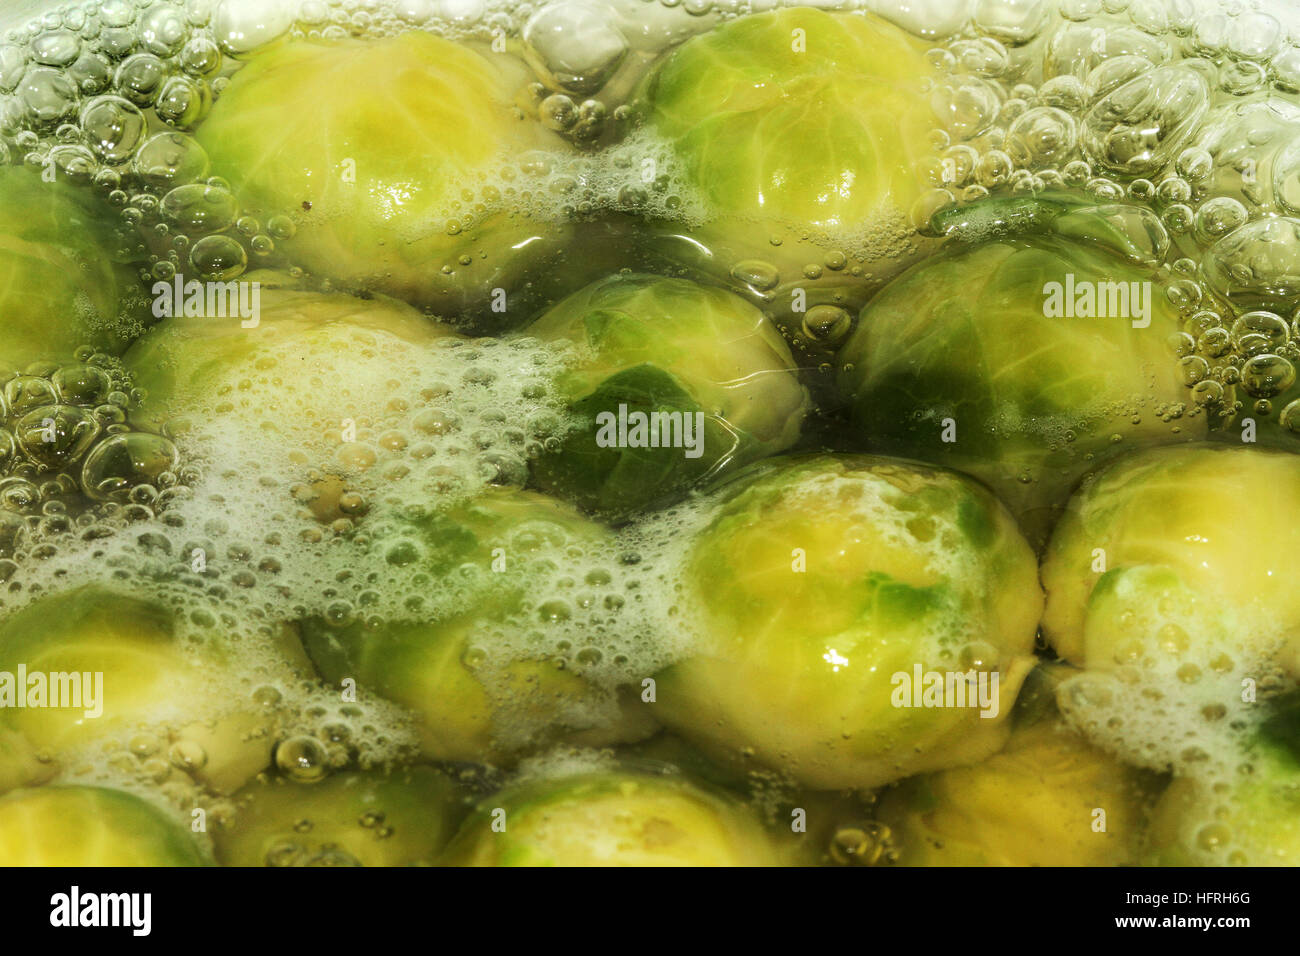 Brussel sprouts cooking in boiling water. Stock Photo